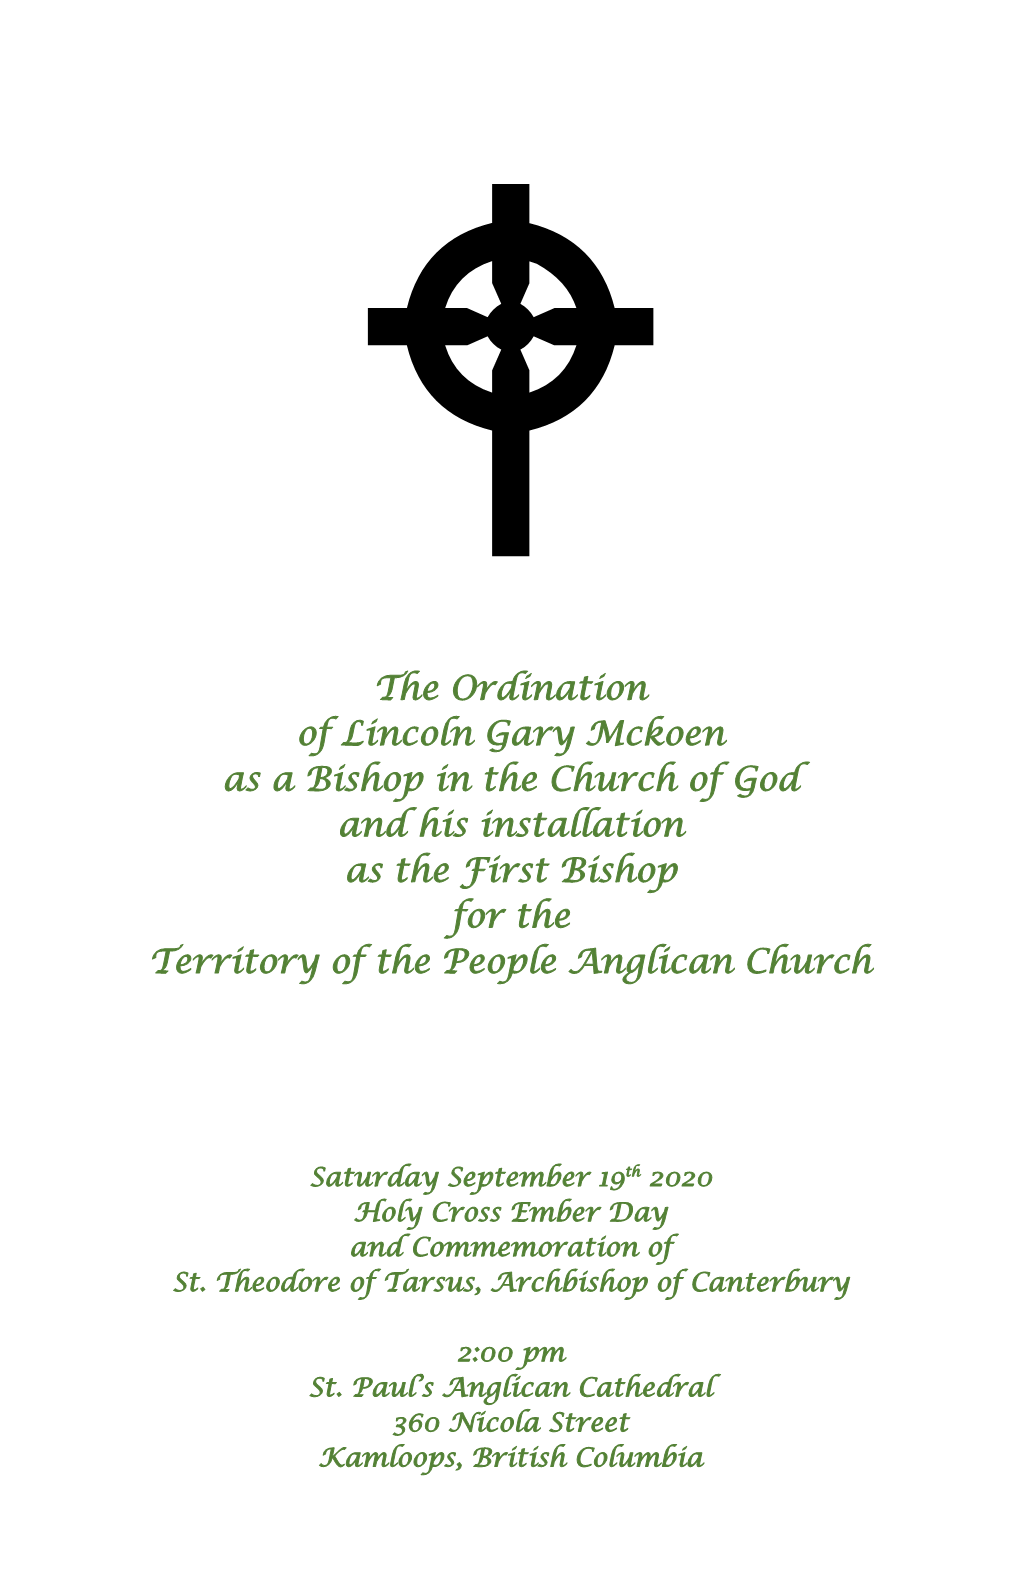 Here Is a Link to the Order of Service Bulletin